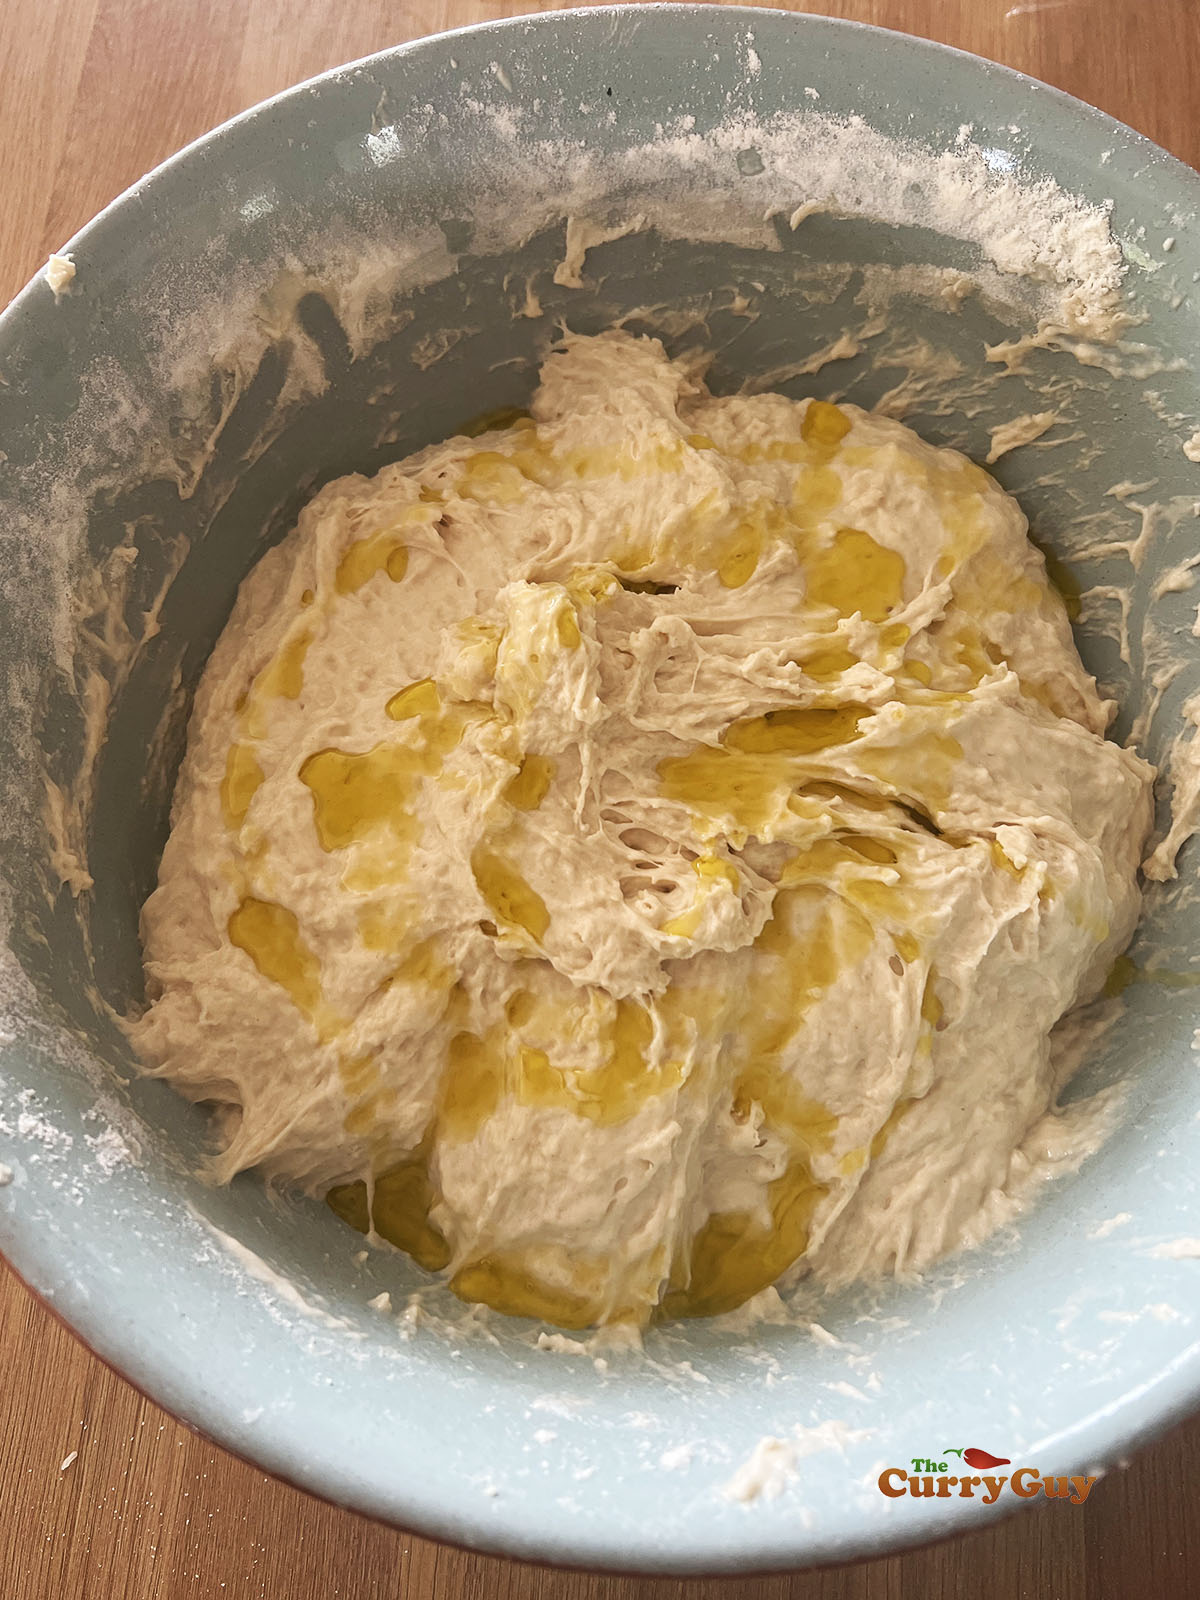 Olive oil drizzled over the dough in a mixing bowl.